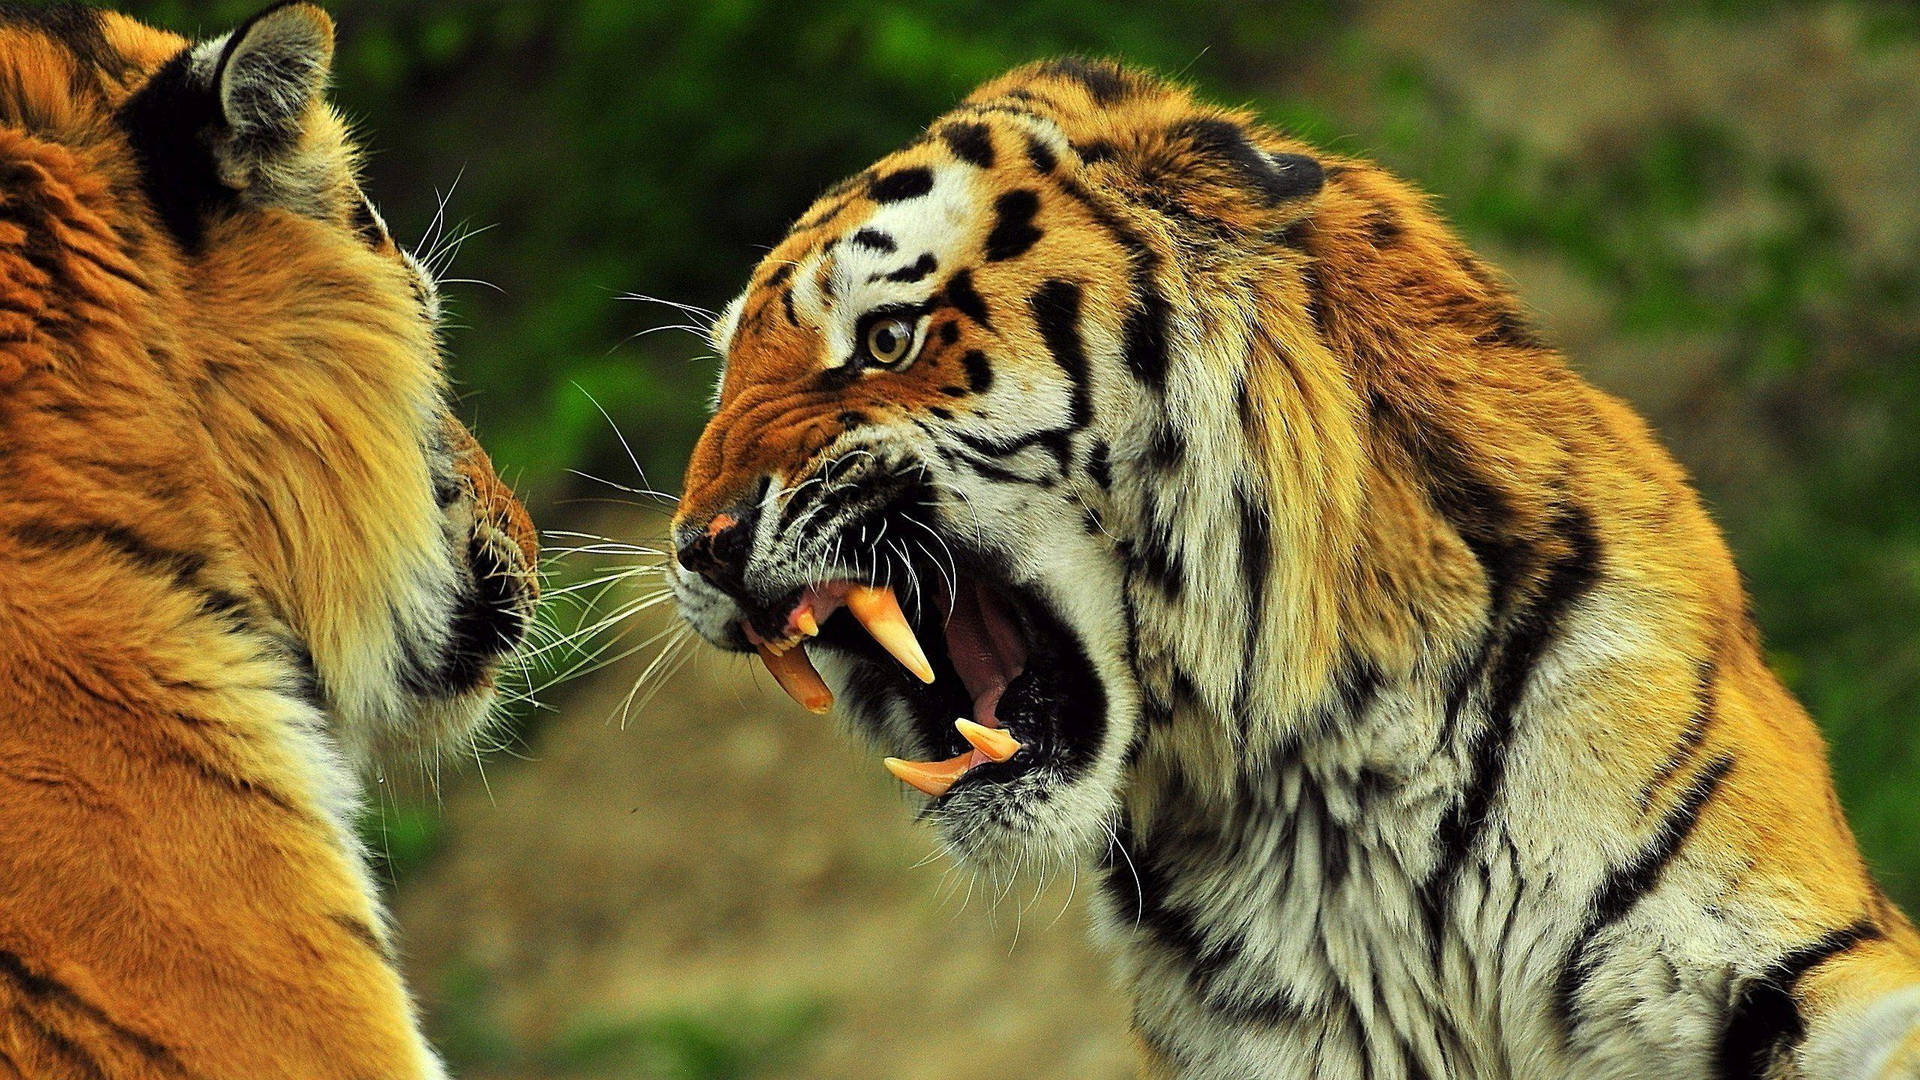 Fighting Angry Tiger Wallpaper